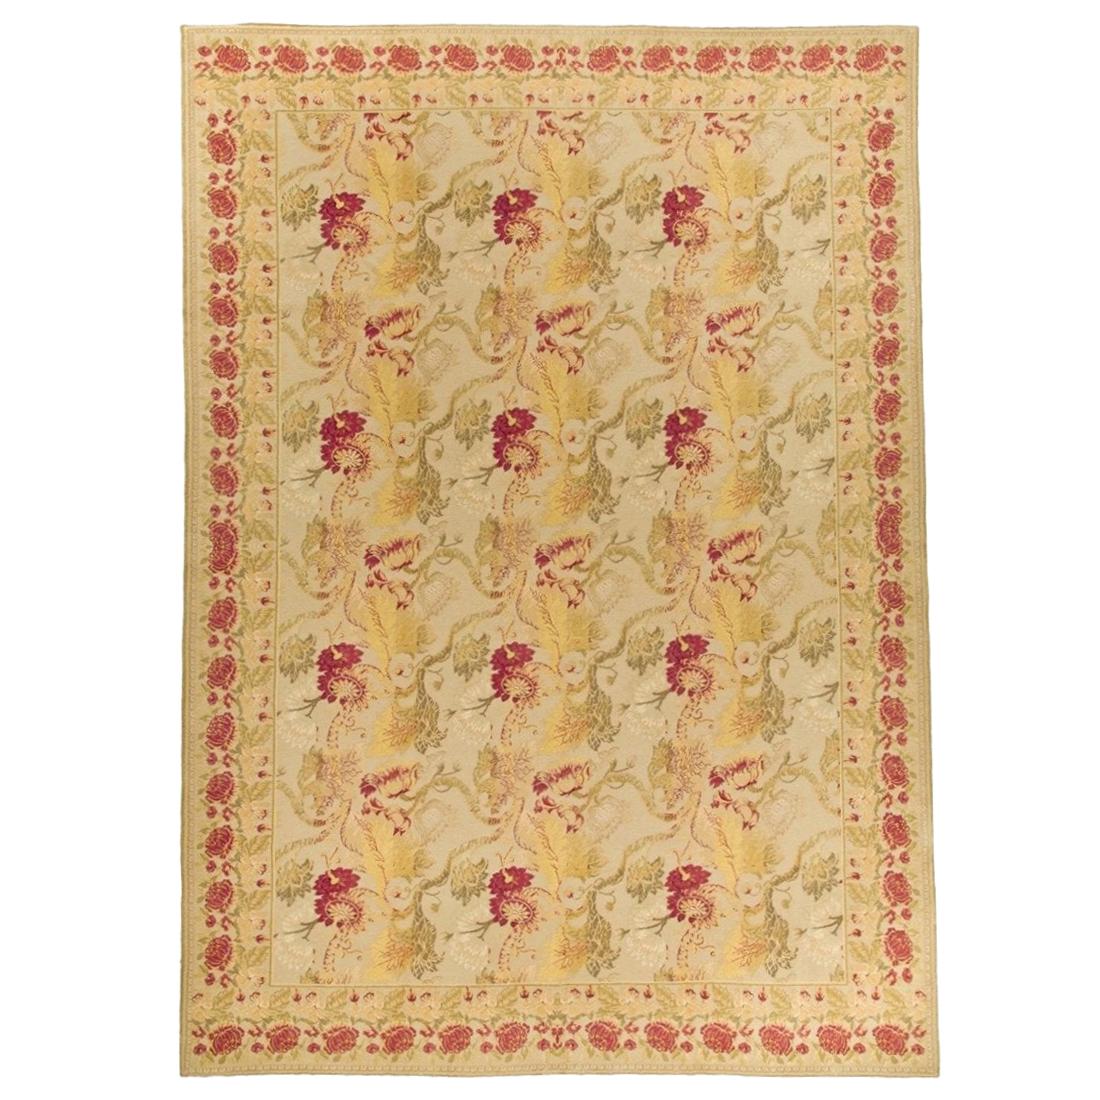 Handwoven Antique Wool Area Rug  10'3 x 14'3 For Sale